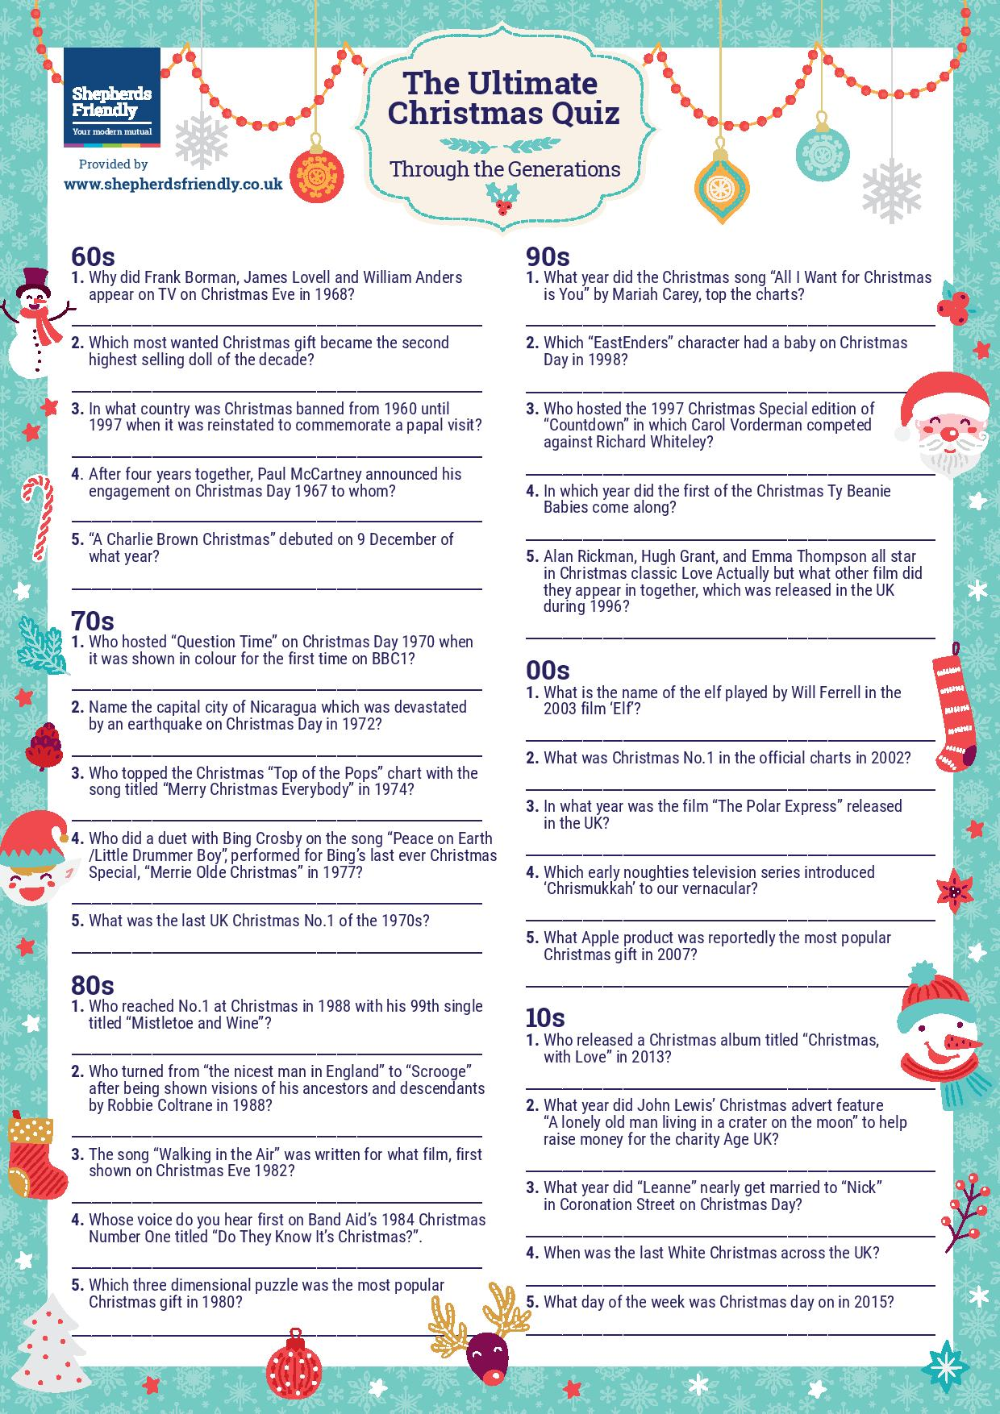 11 Good Christmas Quiz Questions And Answers Printable For Android